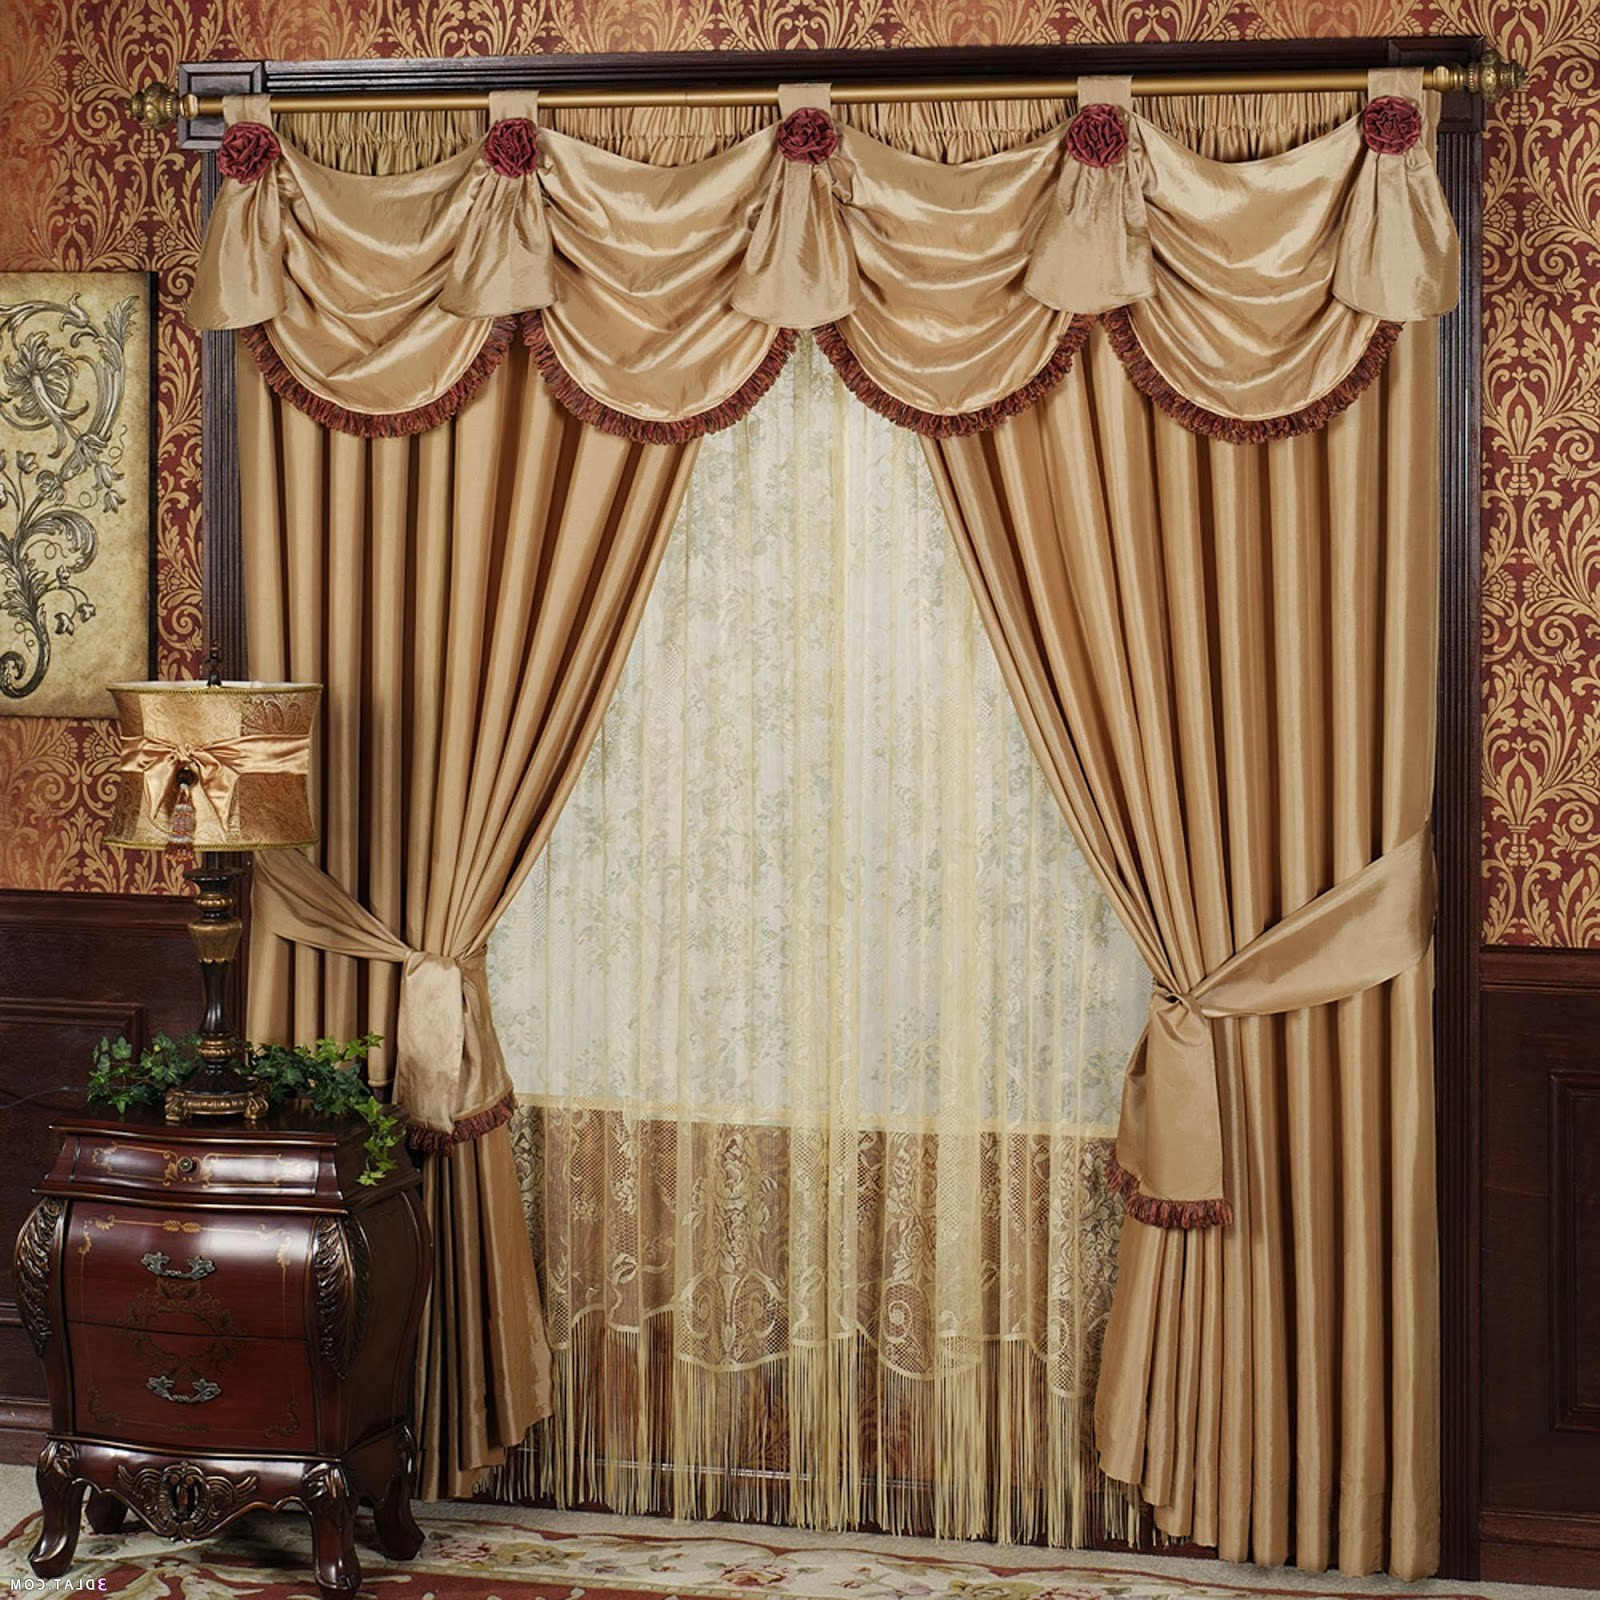 Elegant Living Room Curtains
 Living Room Curtains Designs Excellent Intended Window